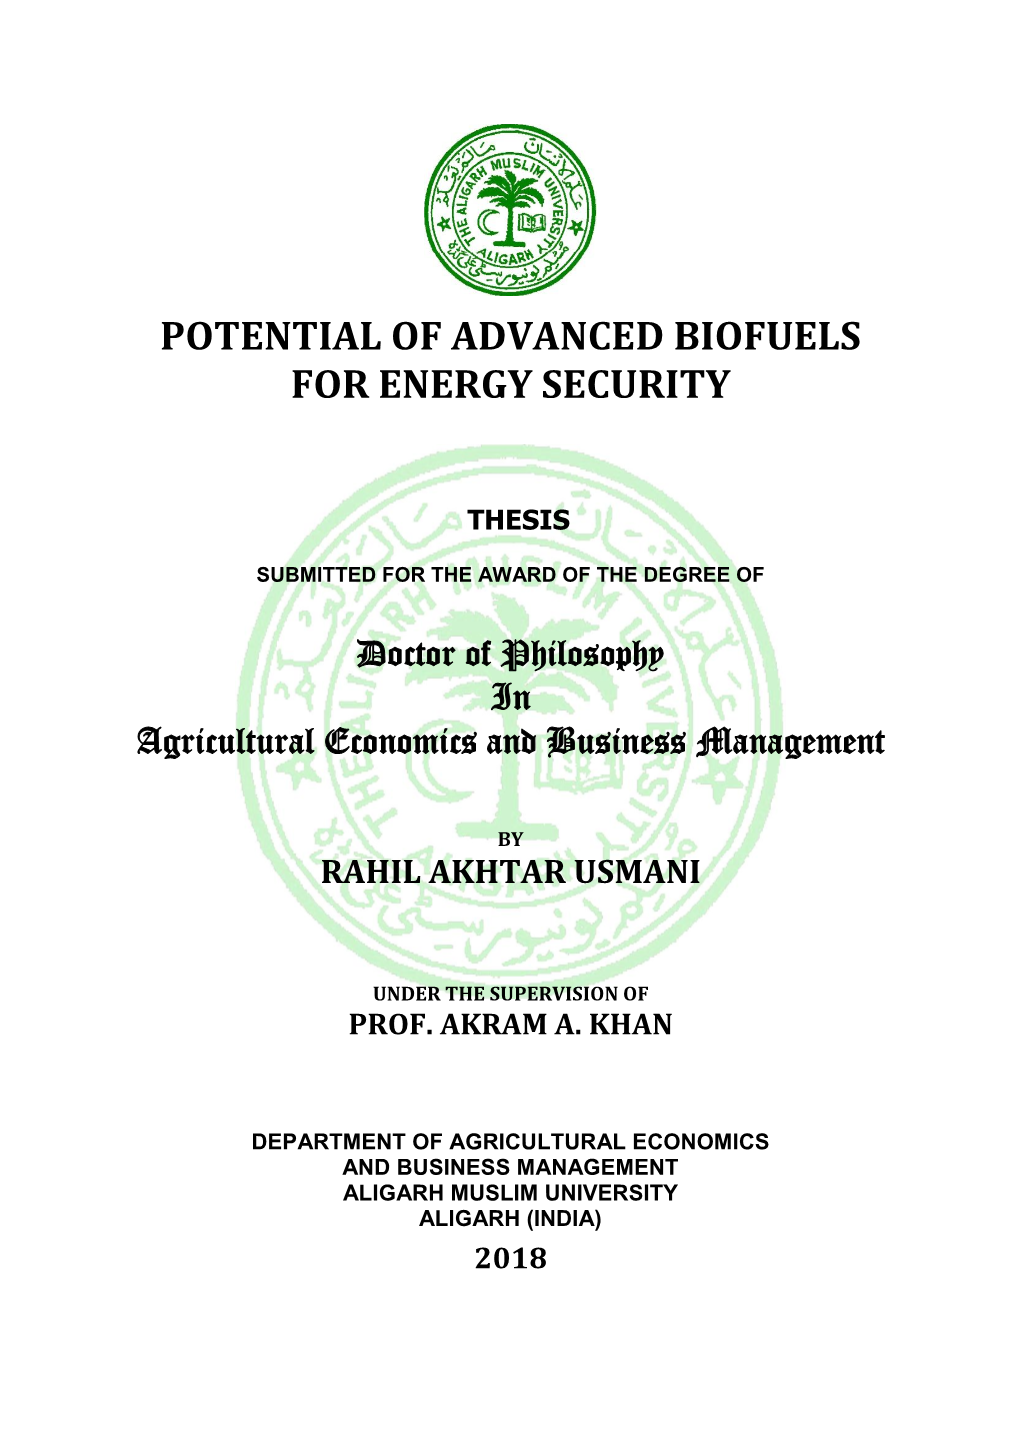 Potential of Advanced Biofuels for Energy Security